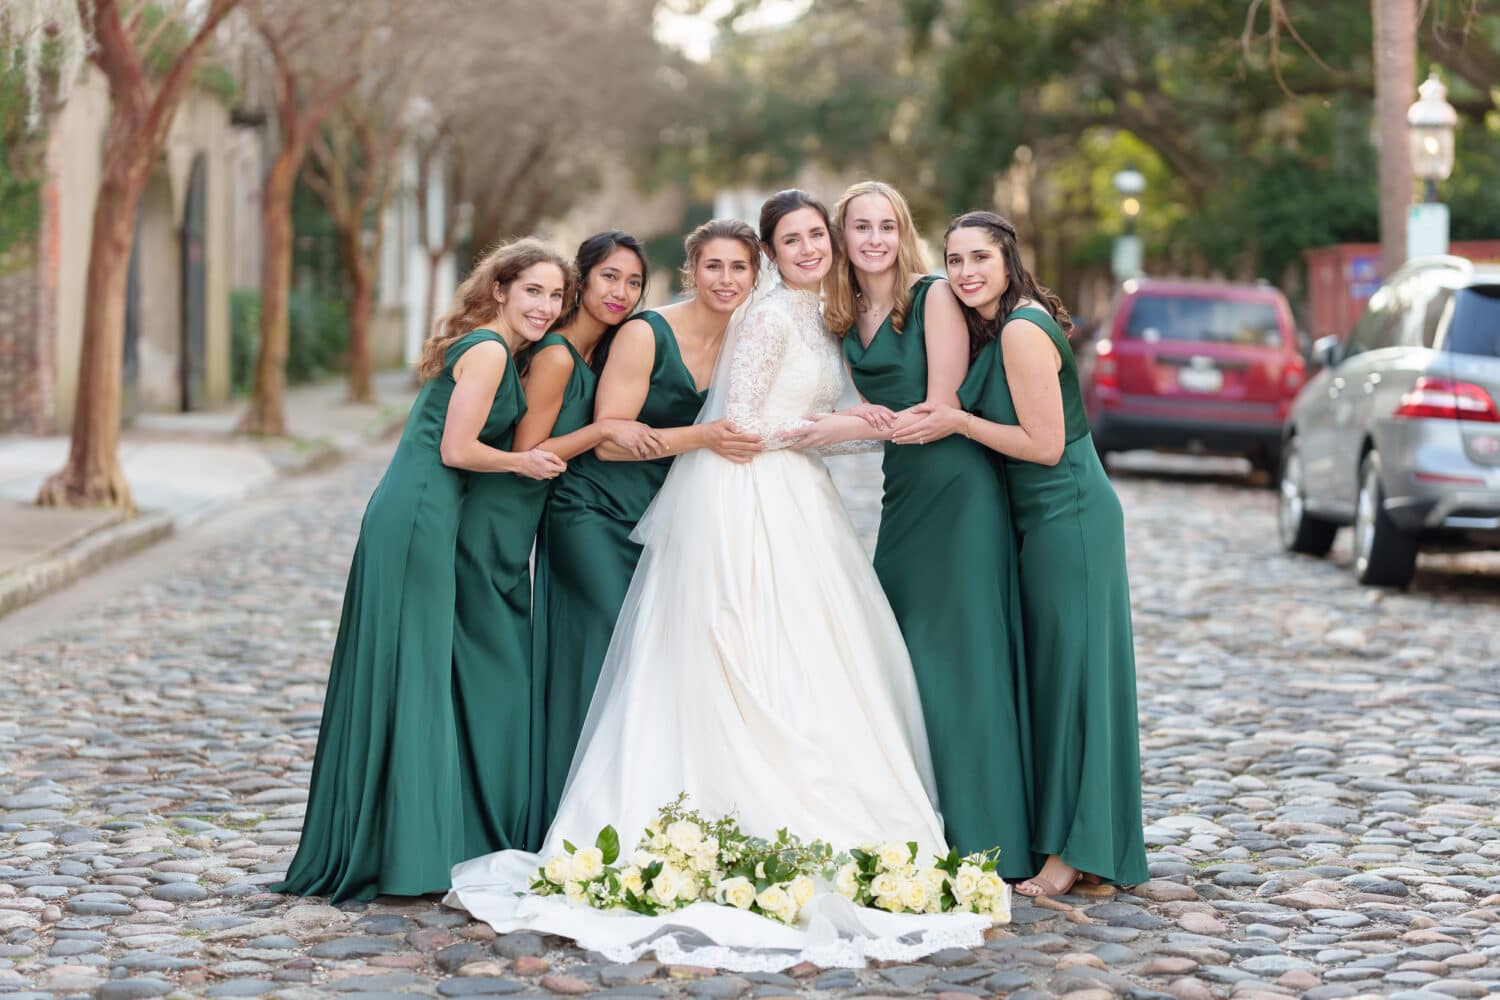 Portraits with the bride and bridesmaids - Chalmers Street